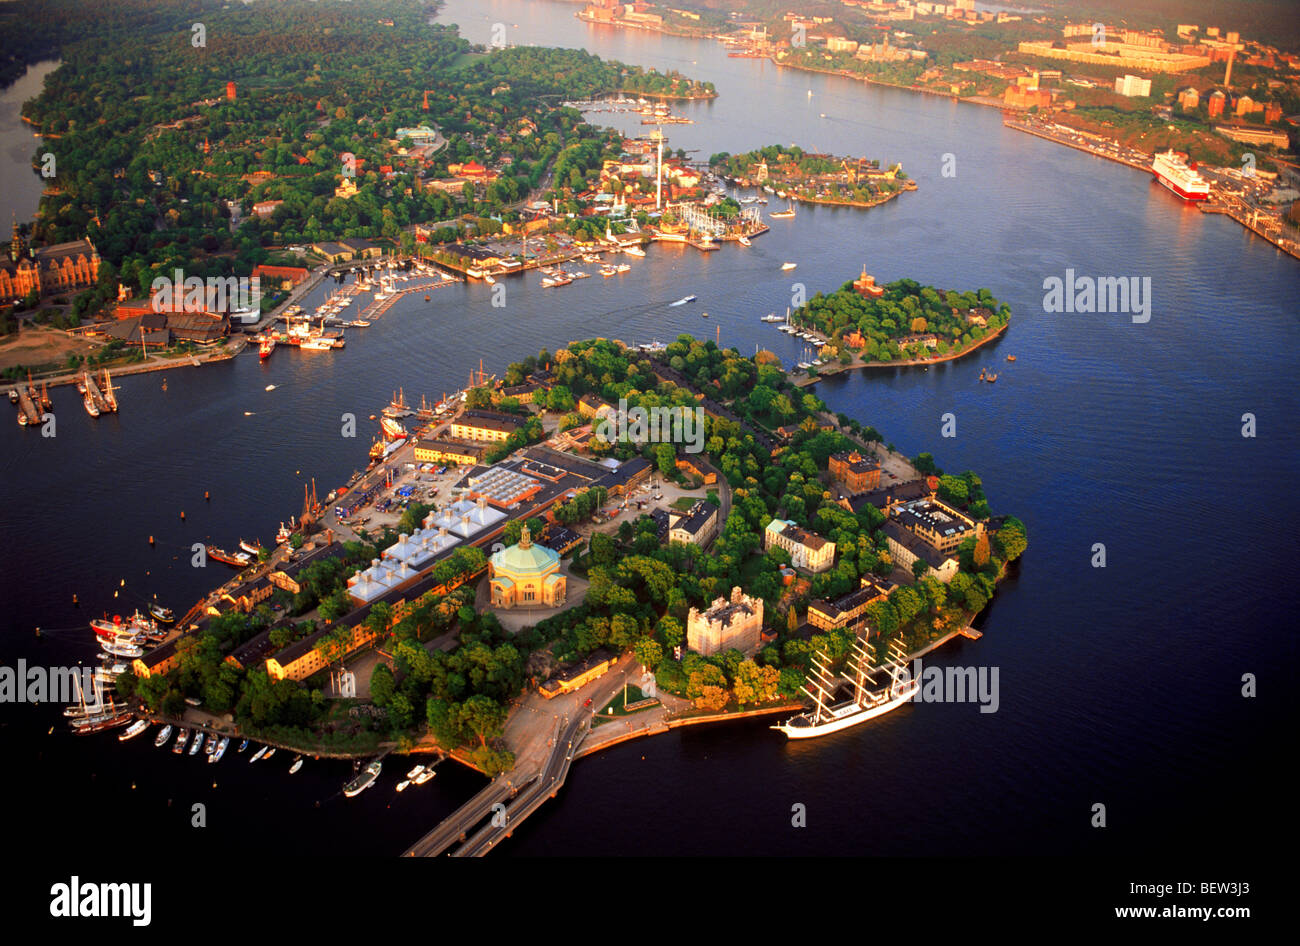 Above Skeppsholmen Island in Saltsjön waters of Stockholm which is a bay of the Baltic Sea Stock Photo